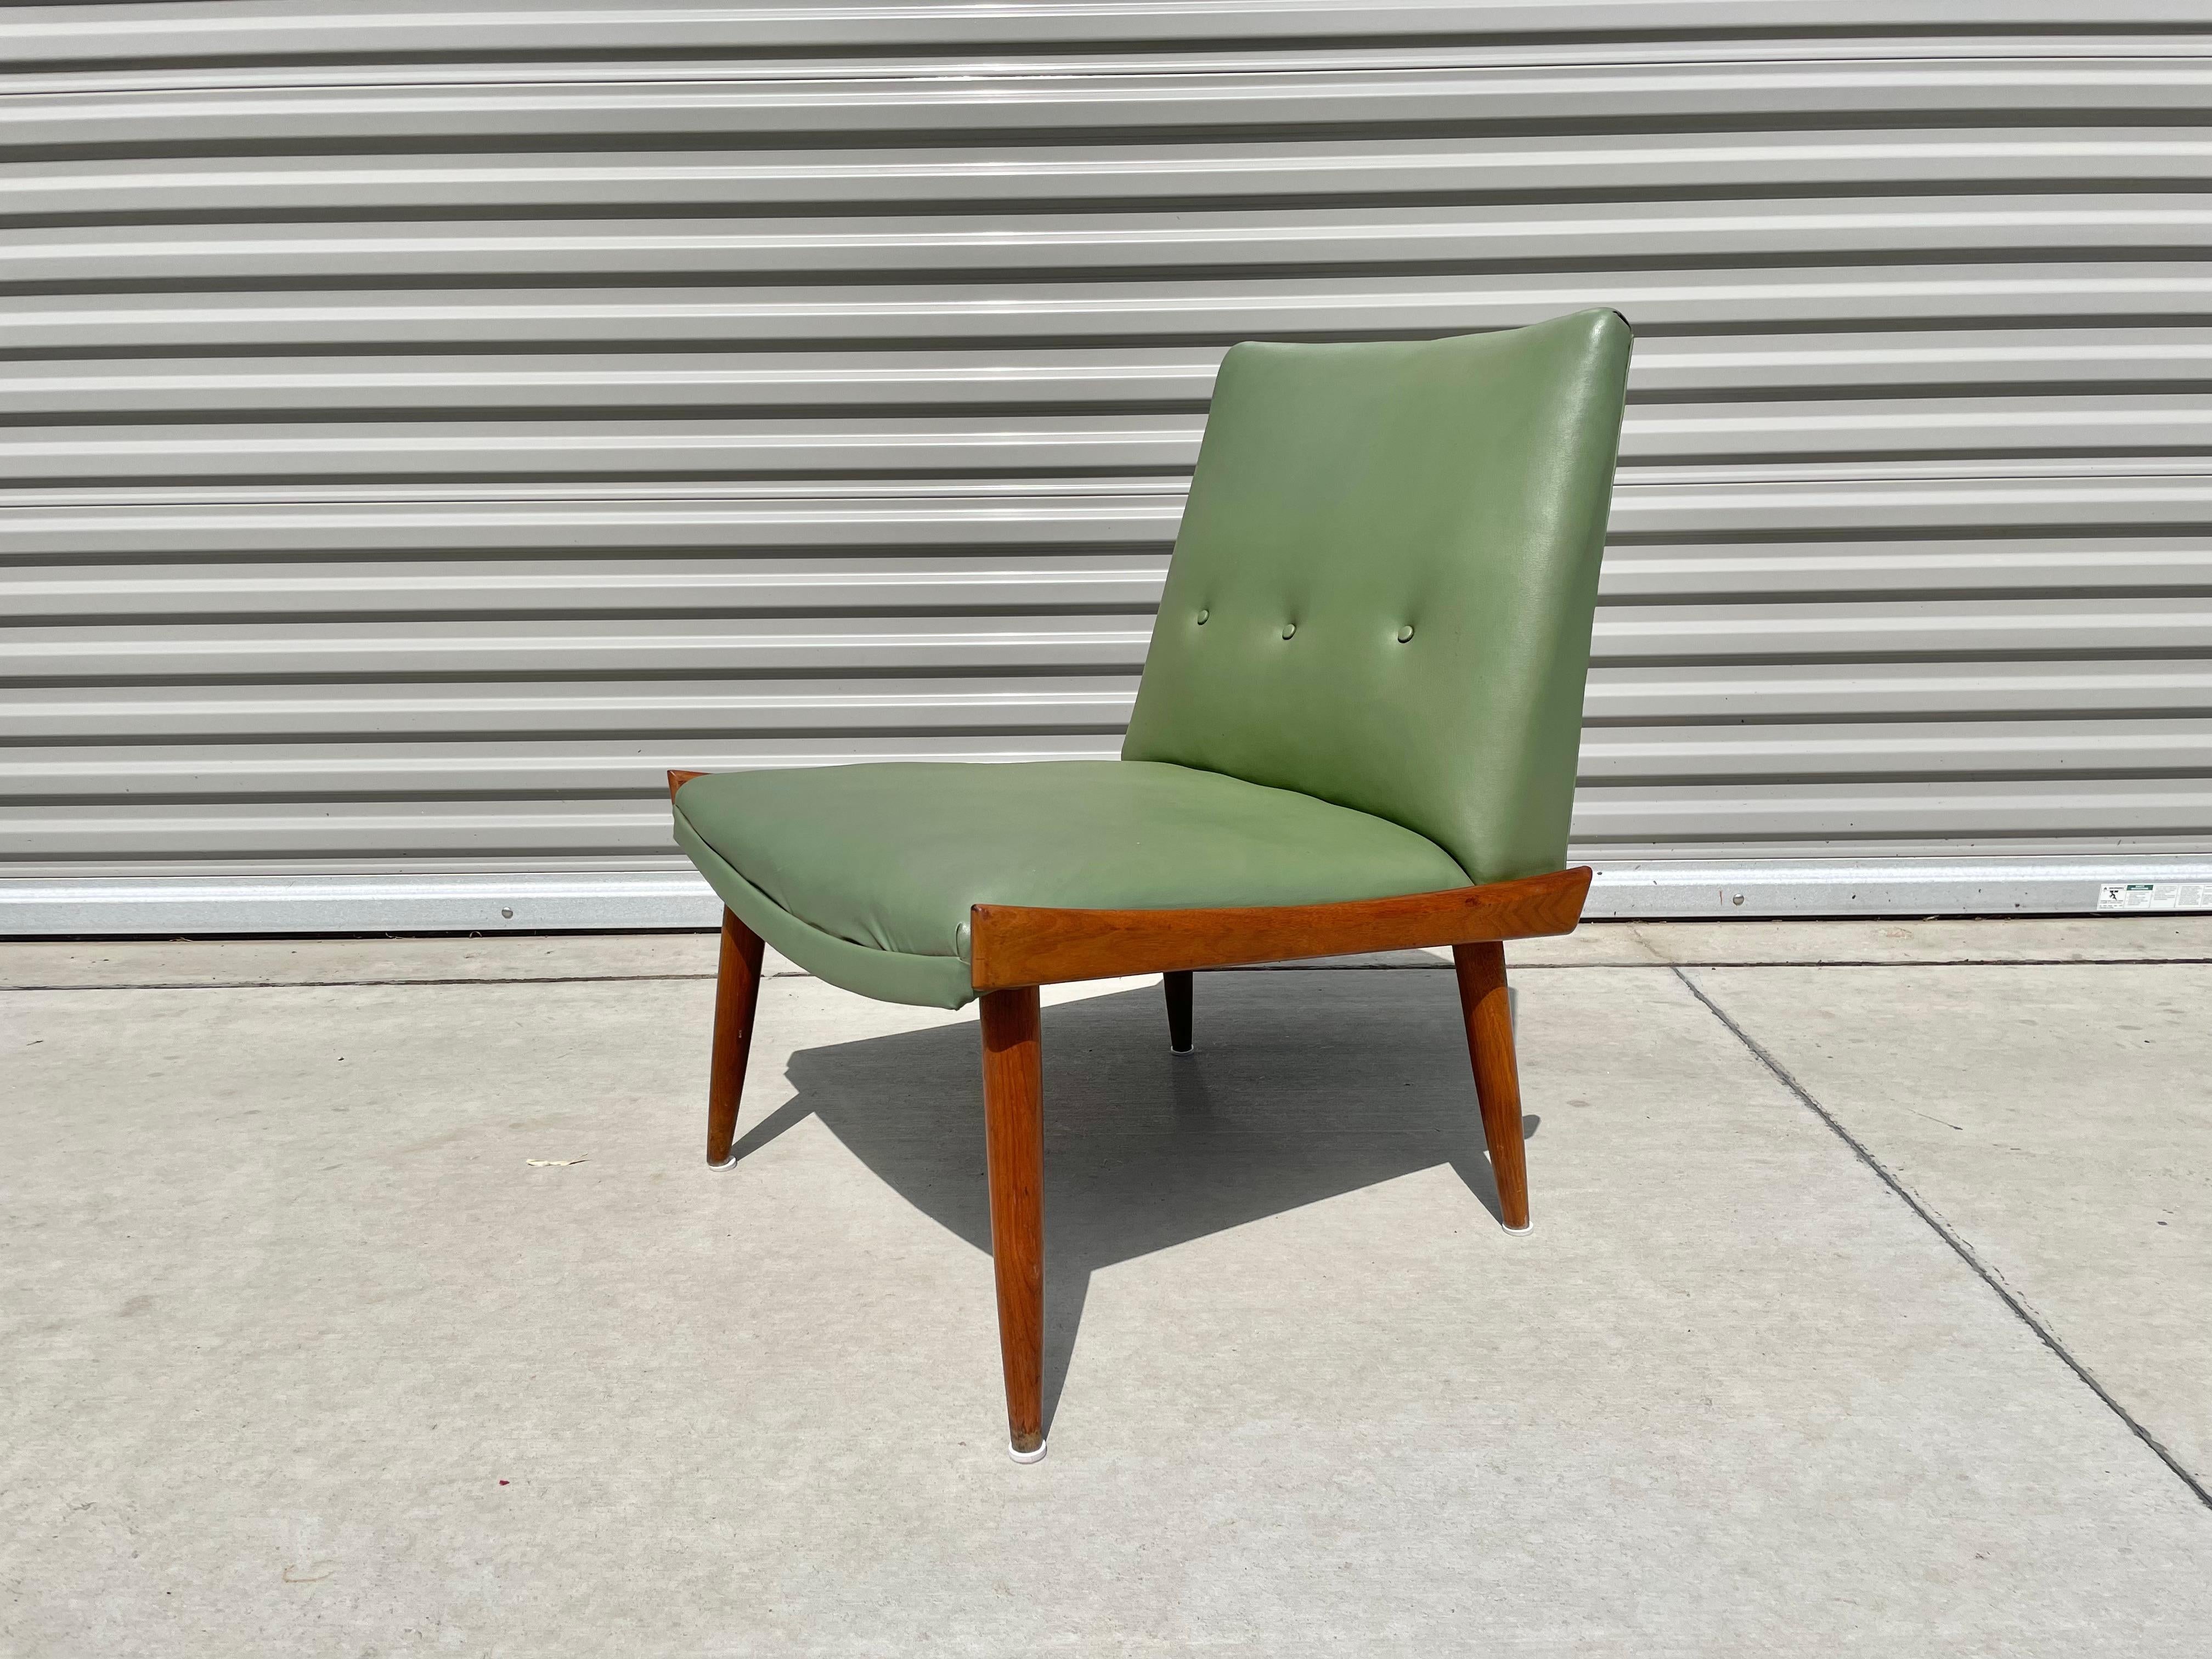 Mid-20th Century Midcentury Slipper Chairs by Kroehler Mfg Co.